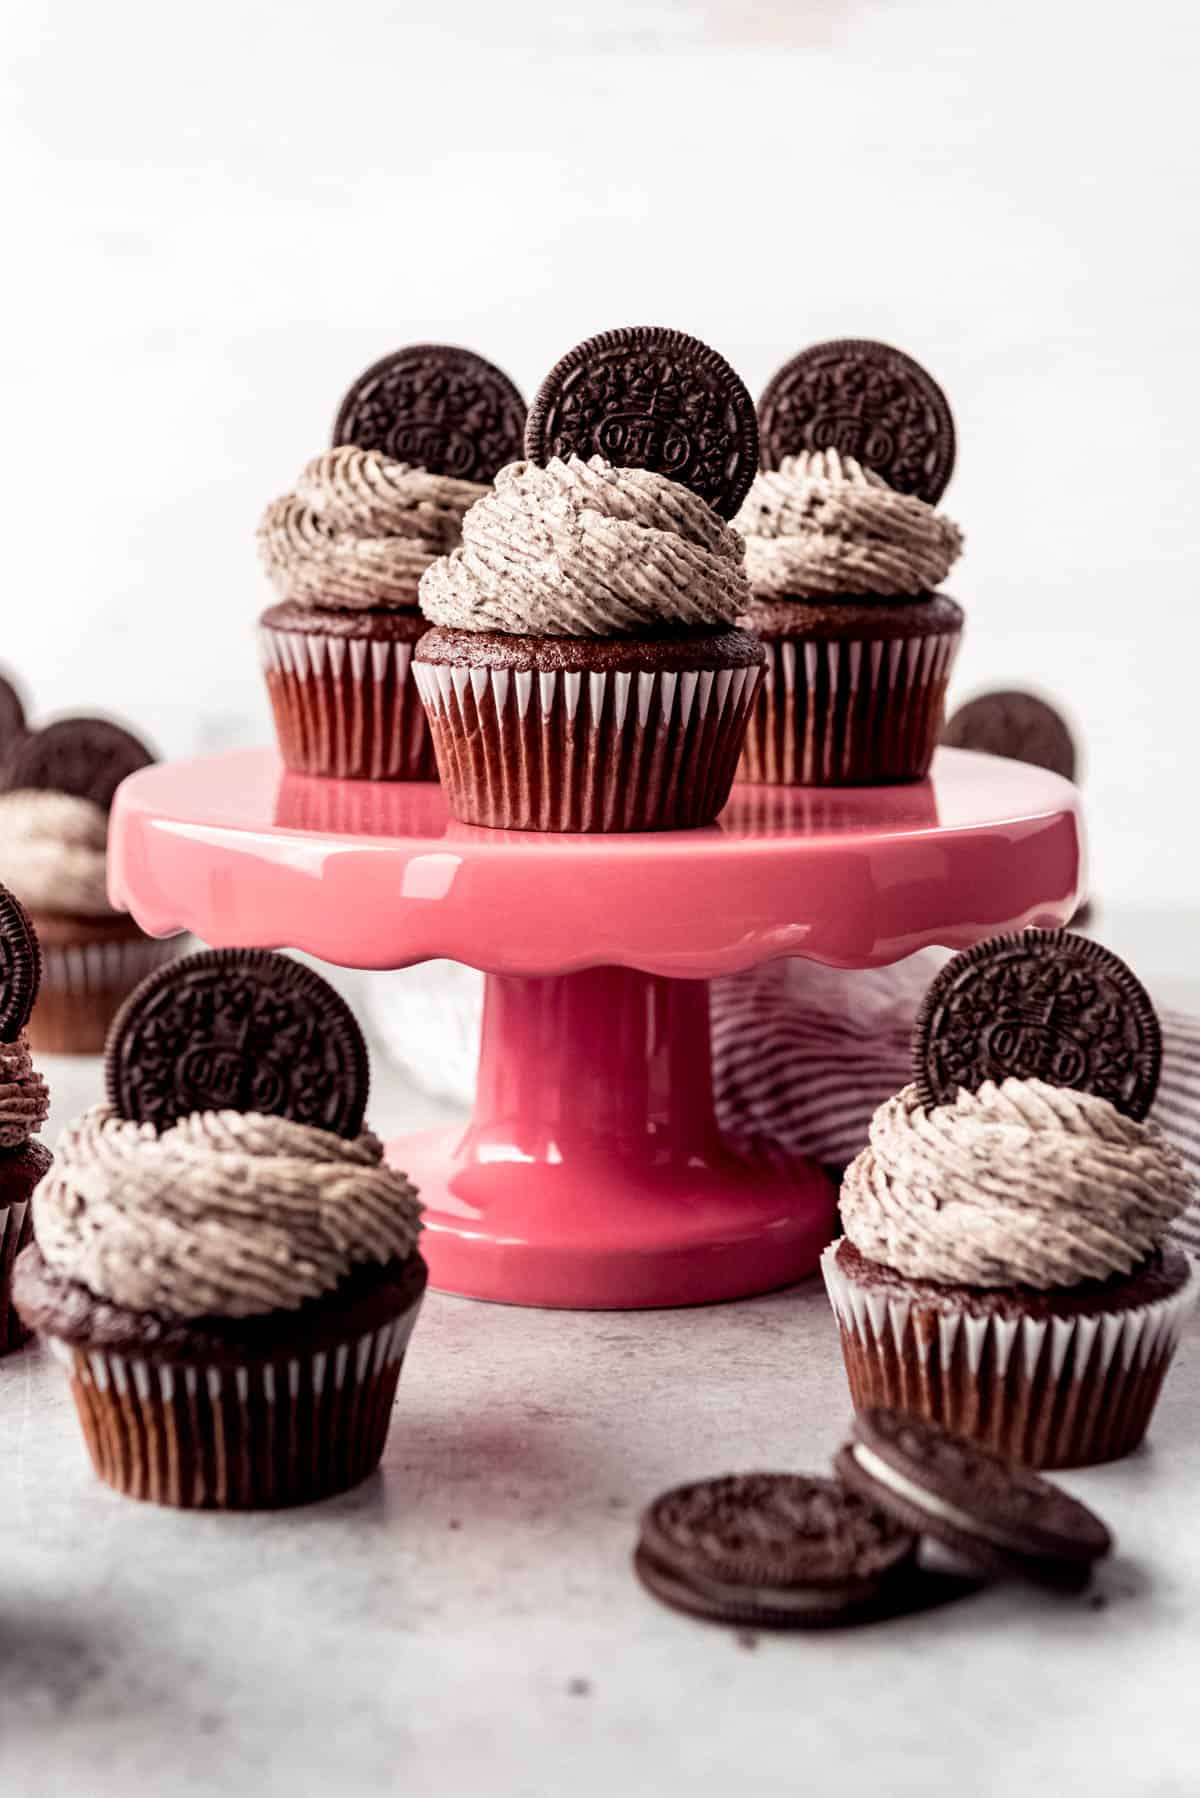 An image of chocolate cupcakes on cake stand with Oreo frosting and whole Oreos decorating the tops.